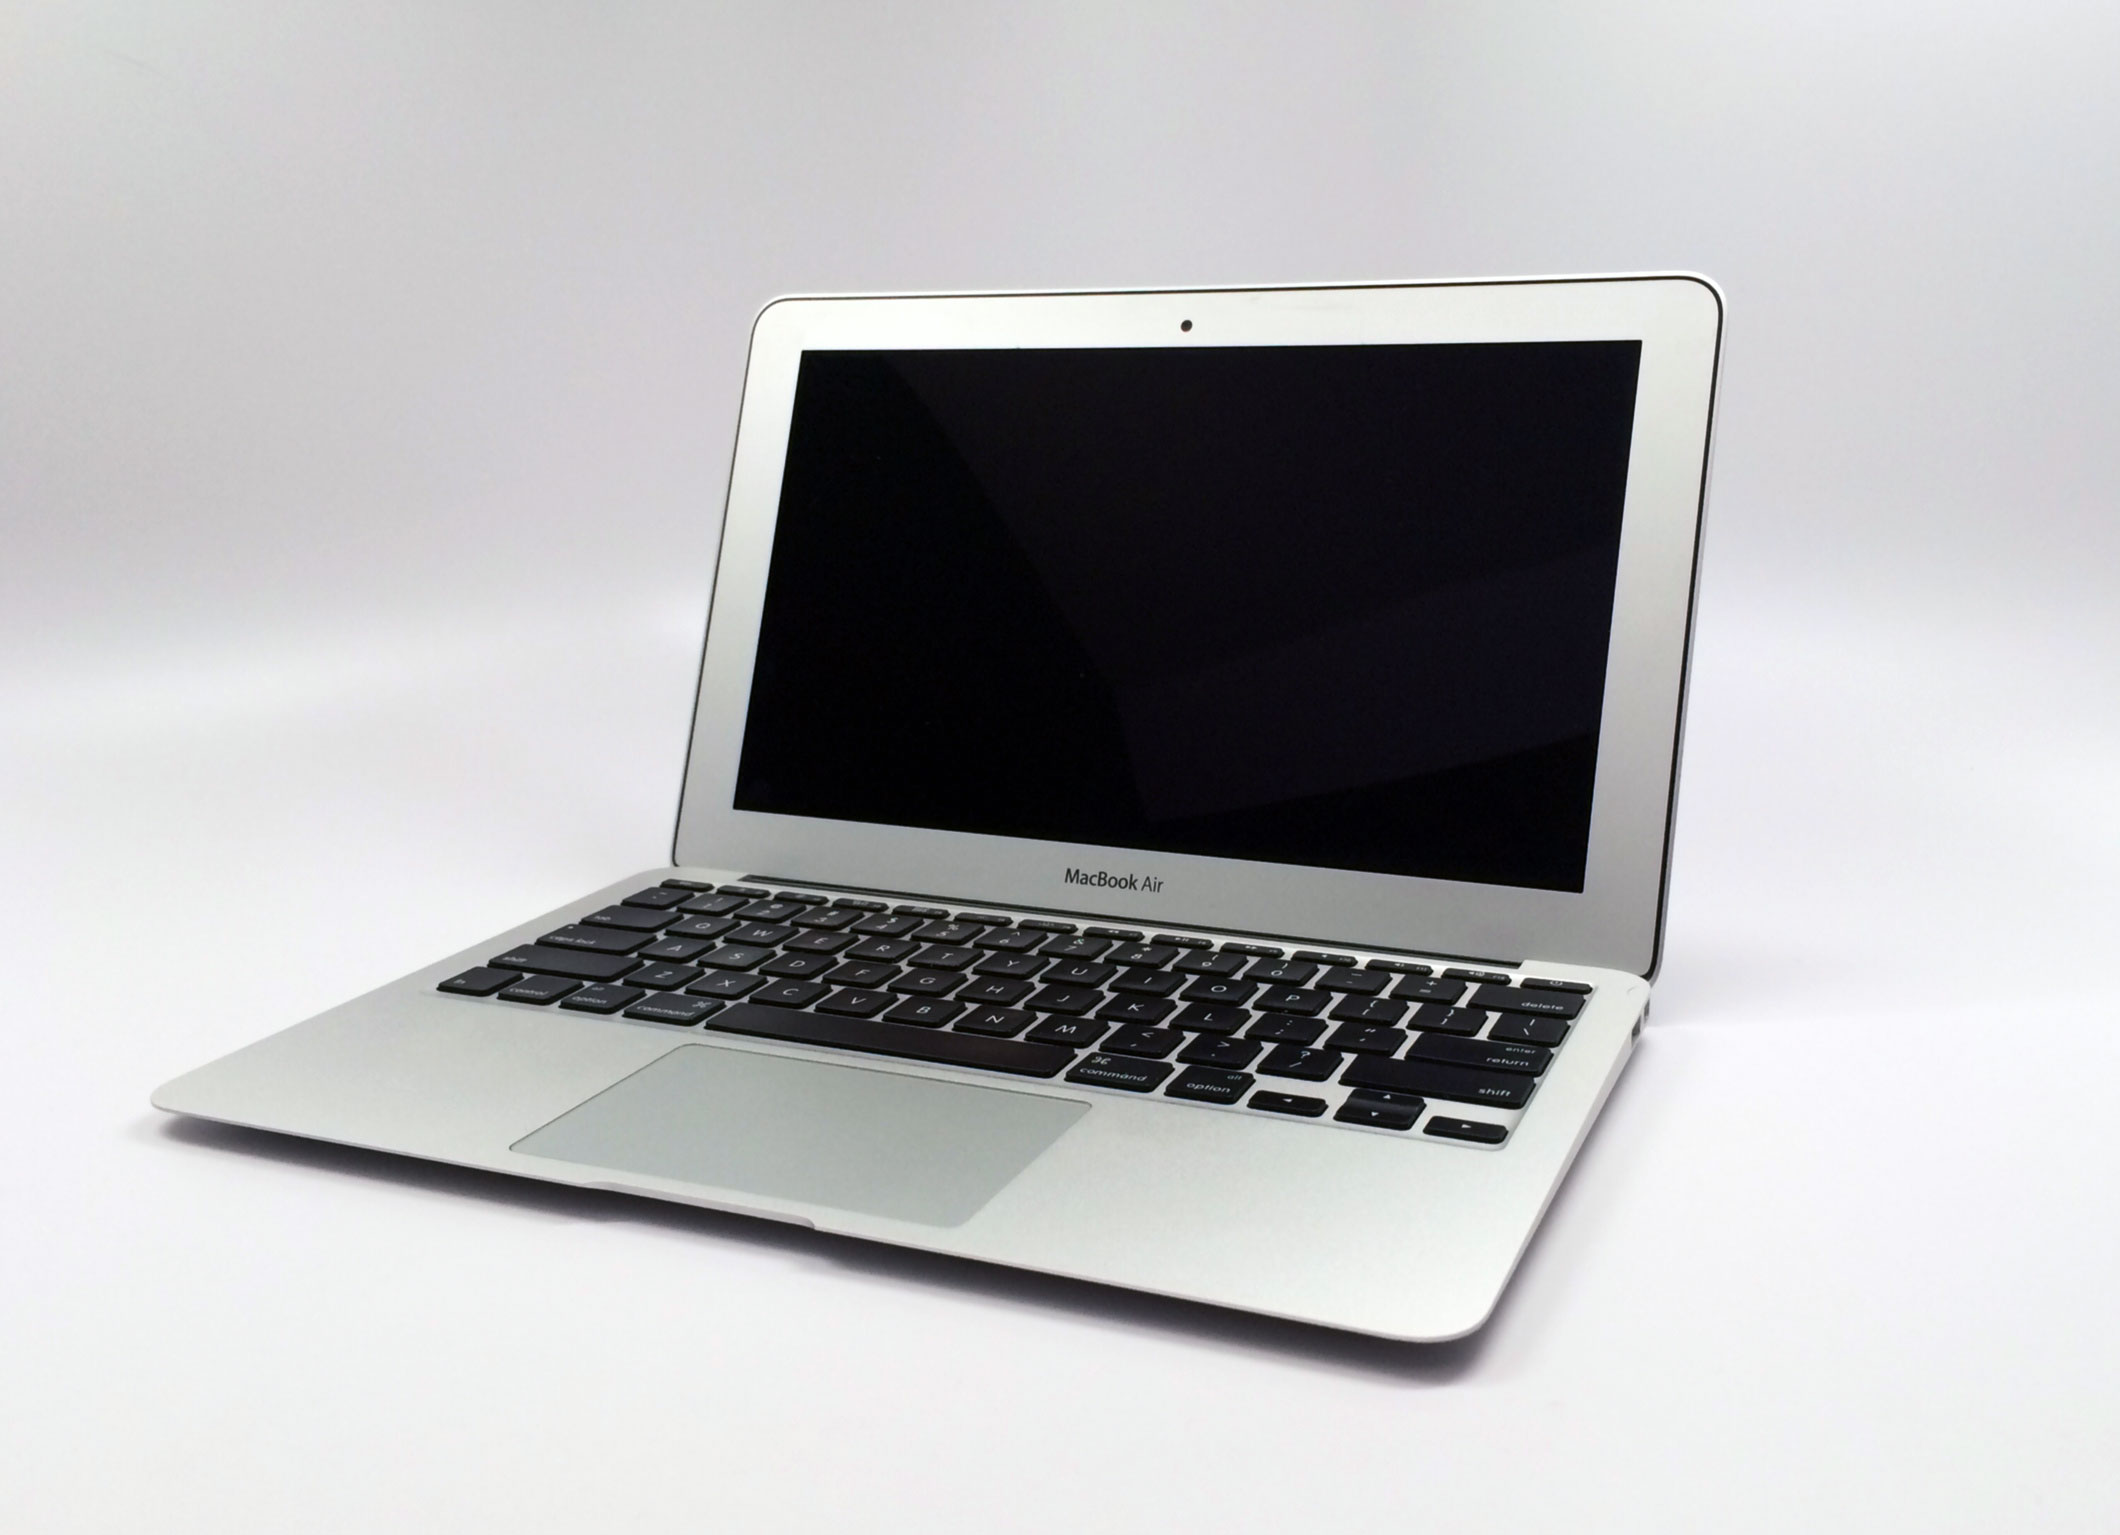 5 Reasons Buyers Need to Wait for the New MacBook Air Release